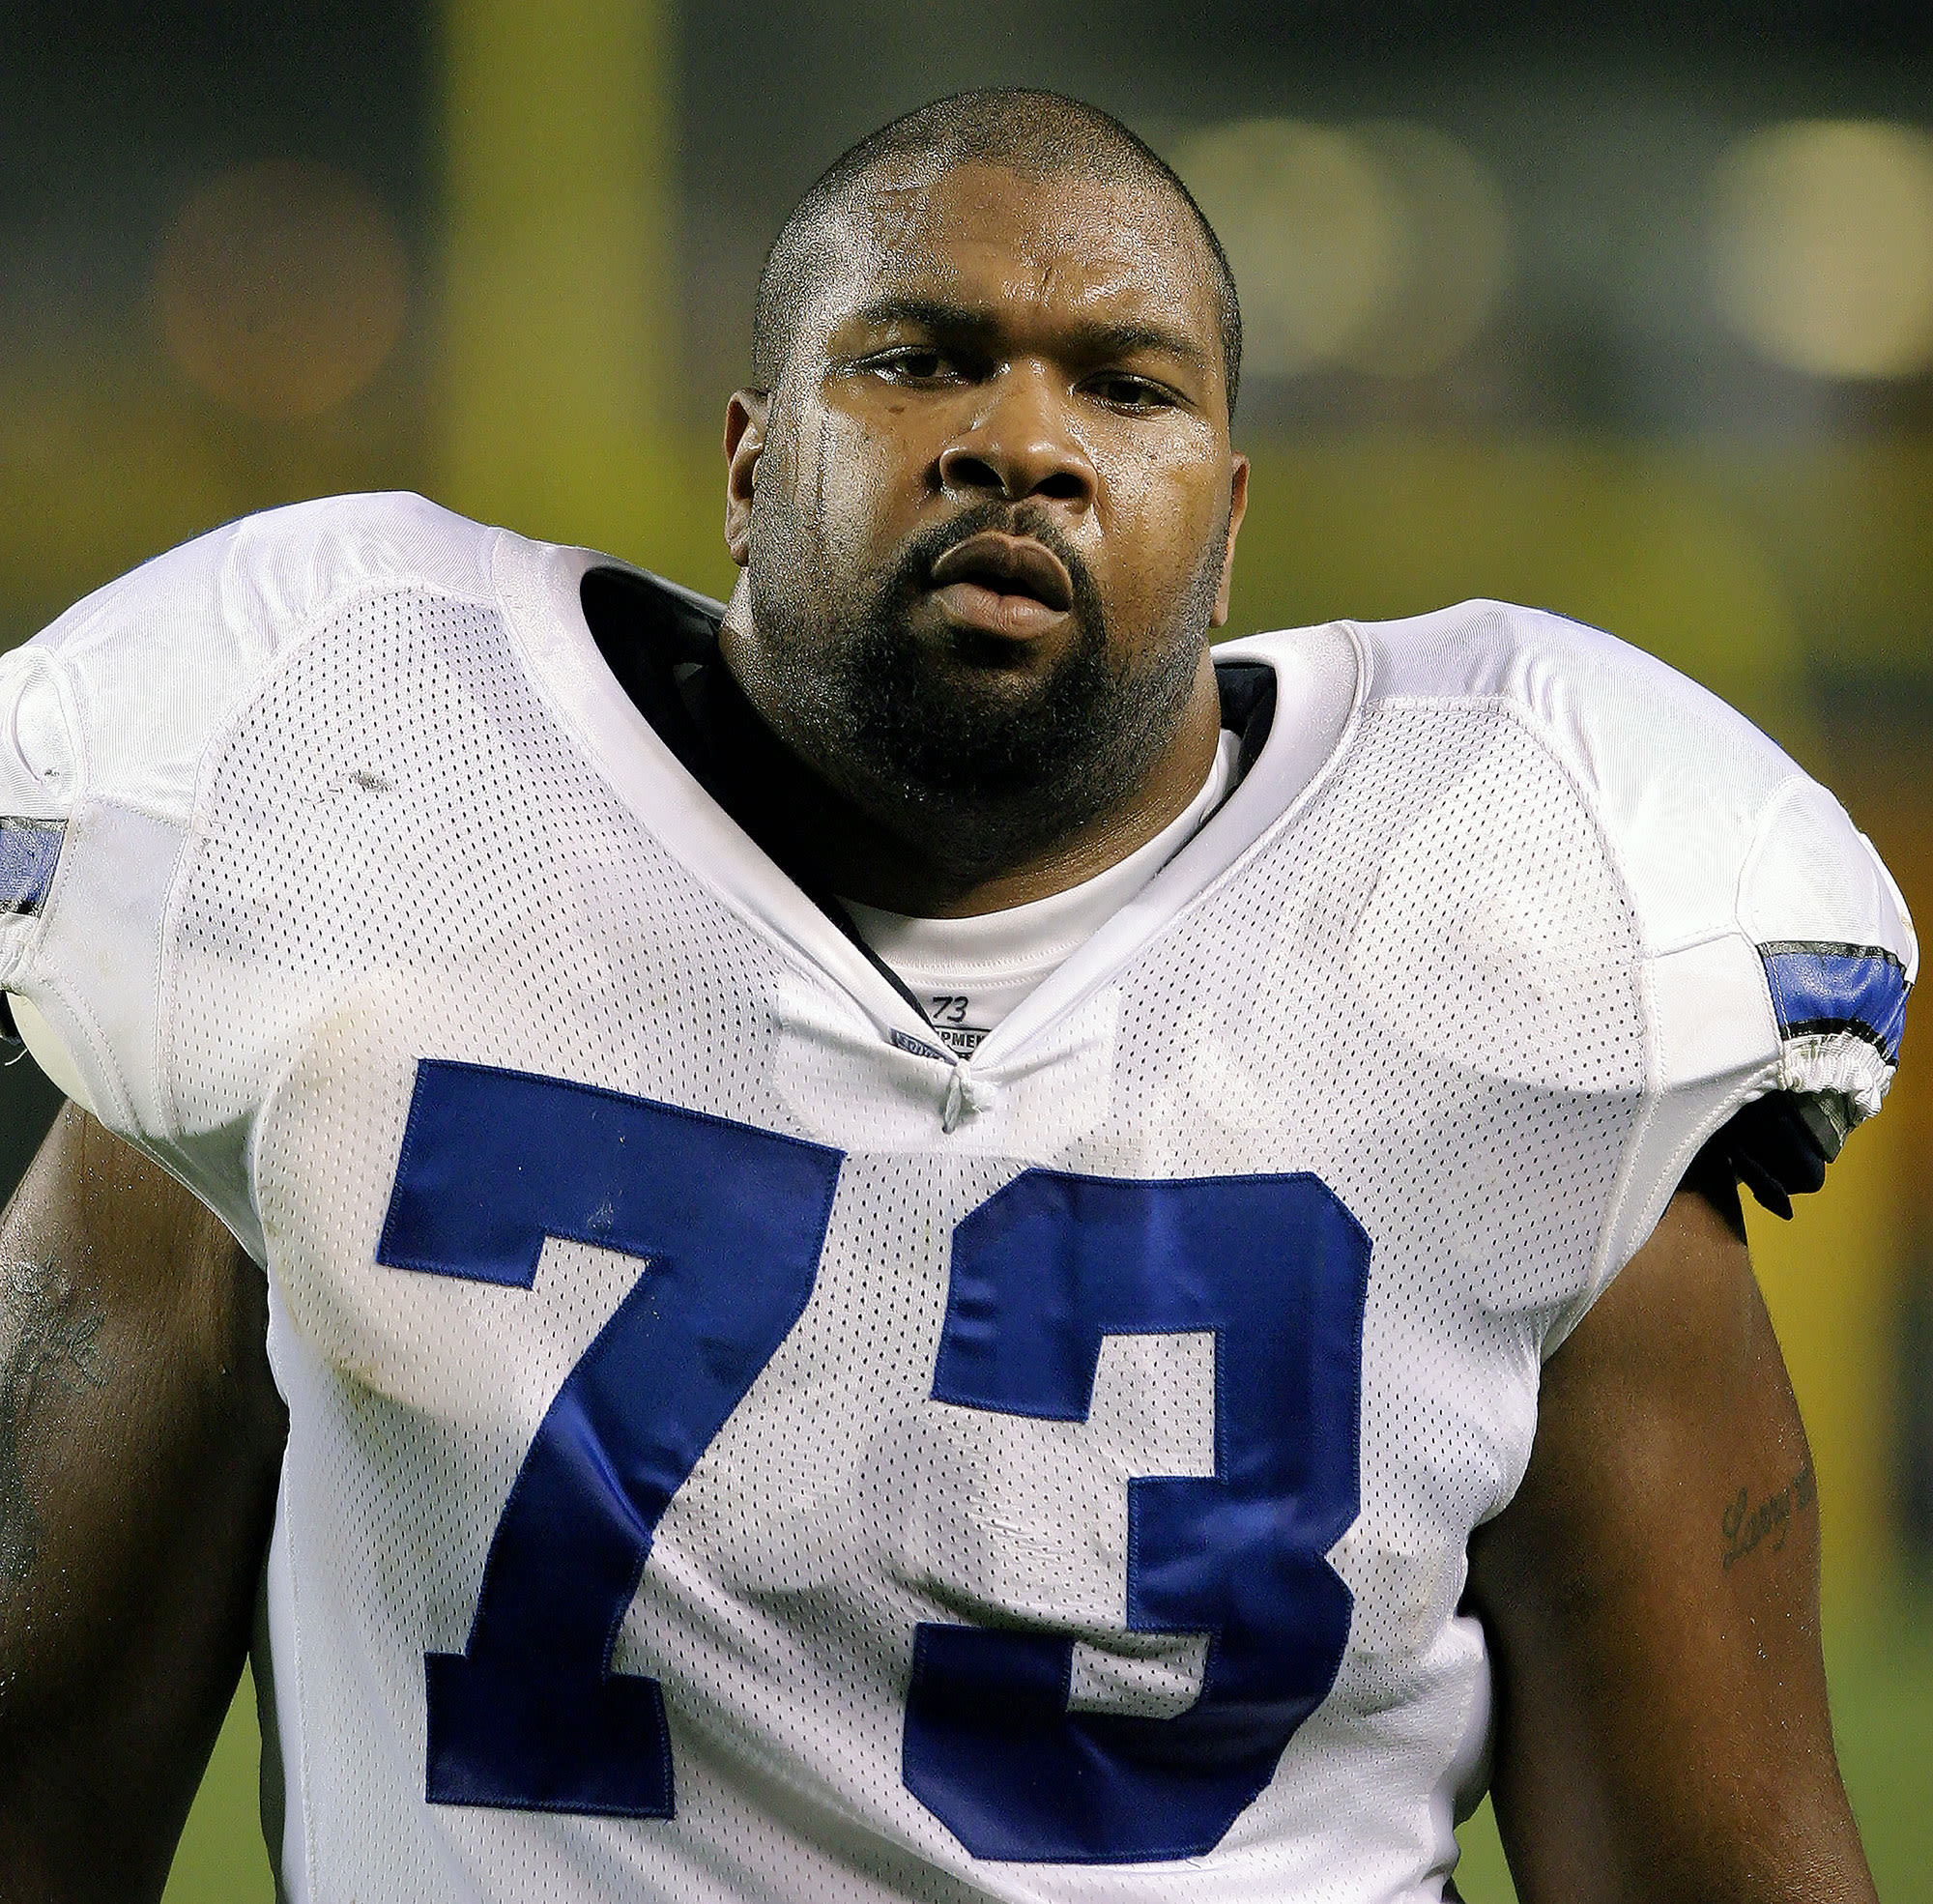 Dallas Cowboys’ Larry Allen Dies Suddenly at Age 52 While on Vacation With His Family